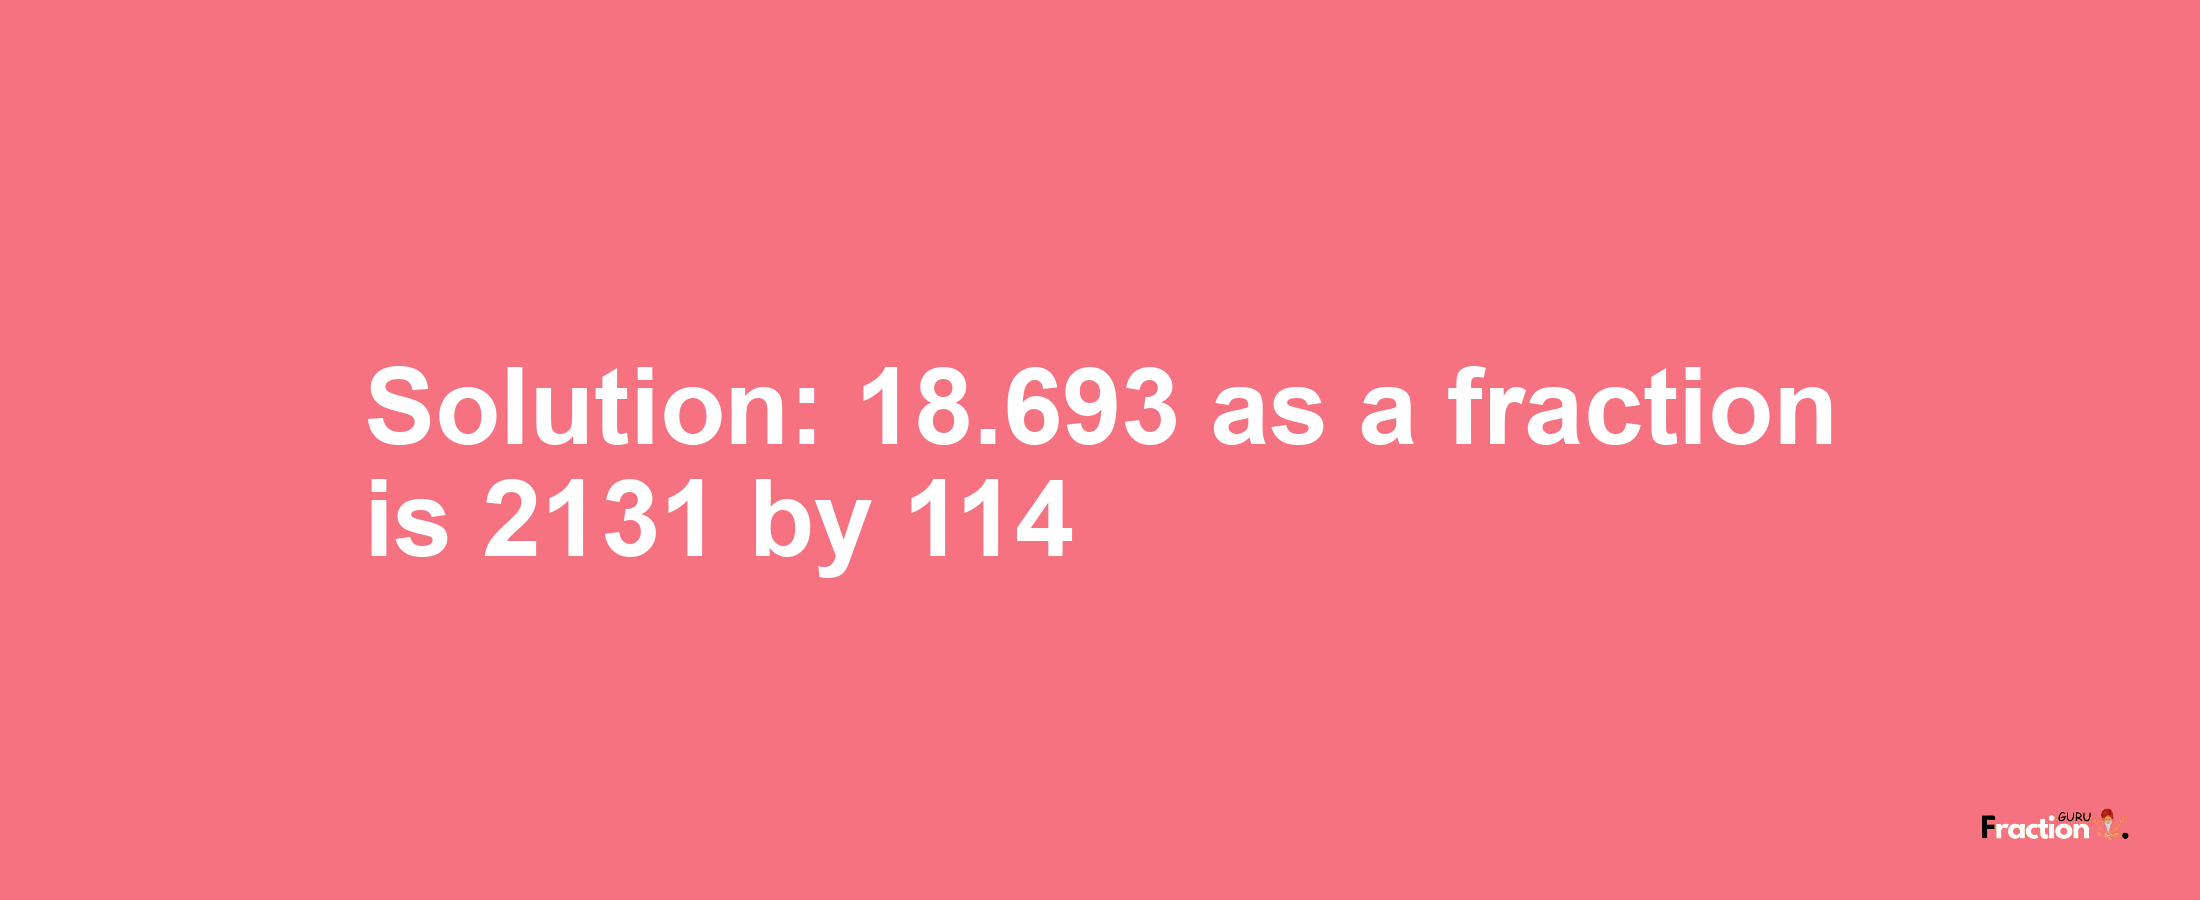 Solution:18.693 as a fraction is 2131/114